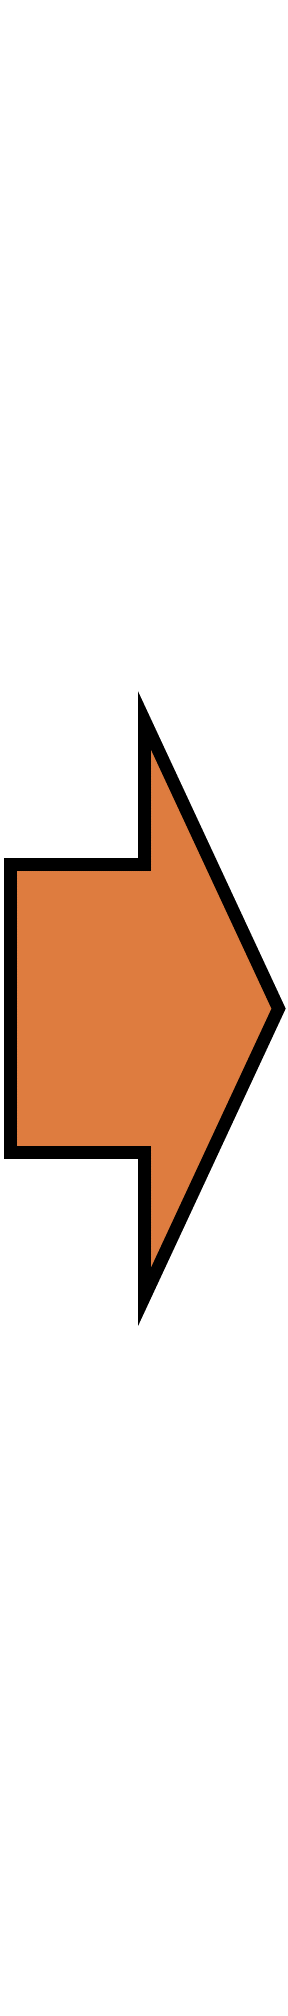 This orange arrow pointing to the right indicates that if the core features in the column to the left are met, then the action items in the column to the right are suggested.